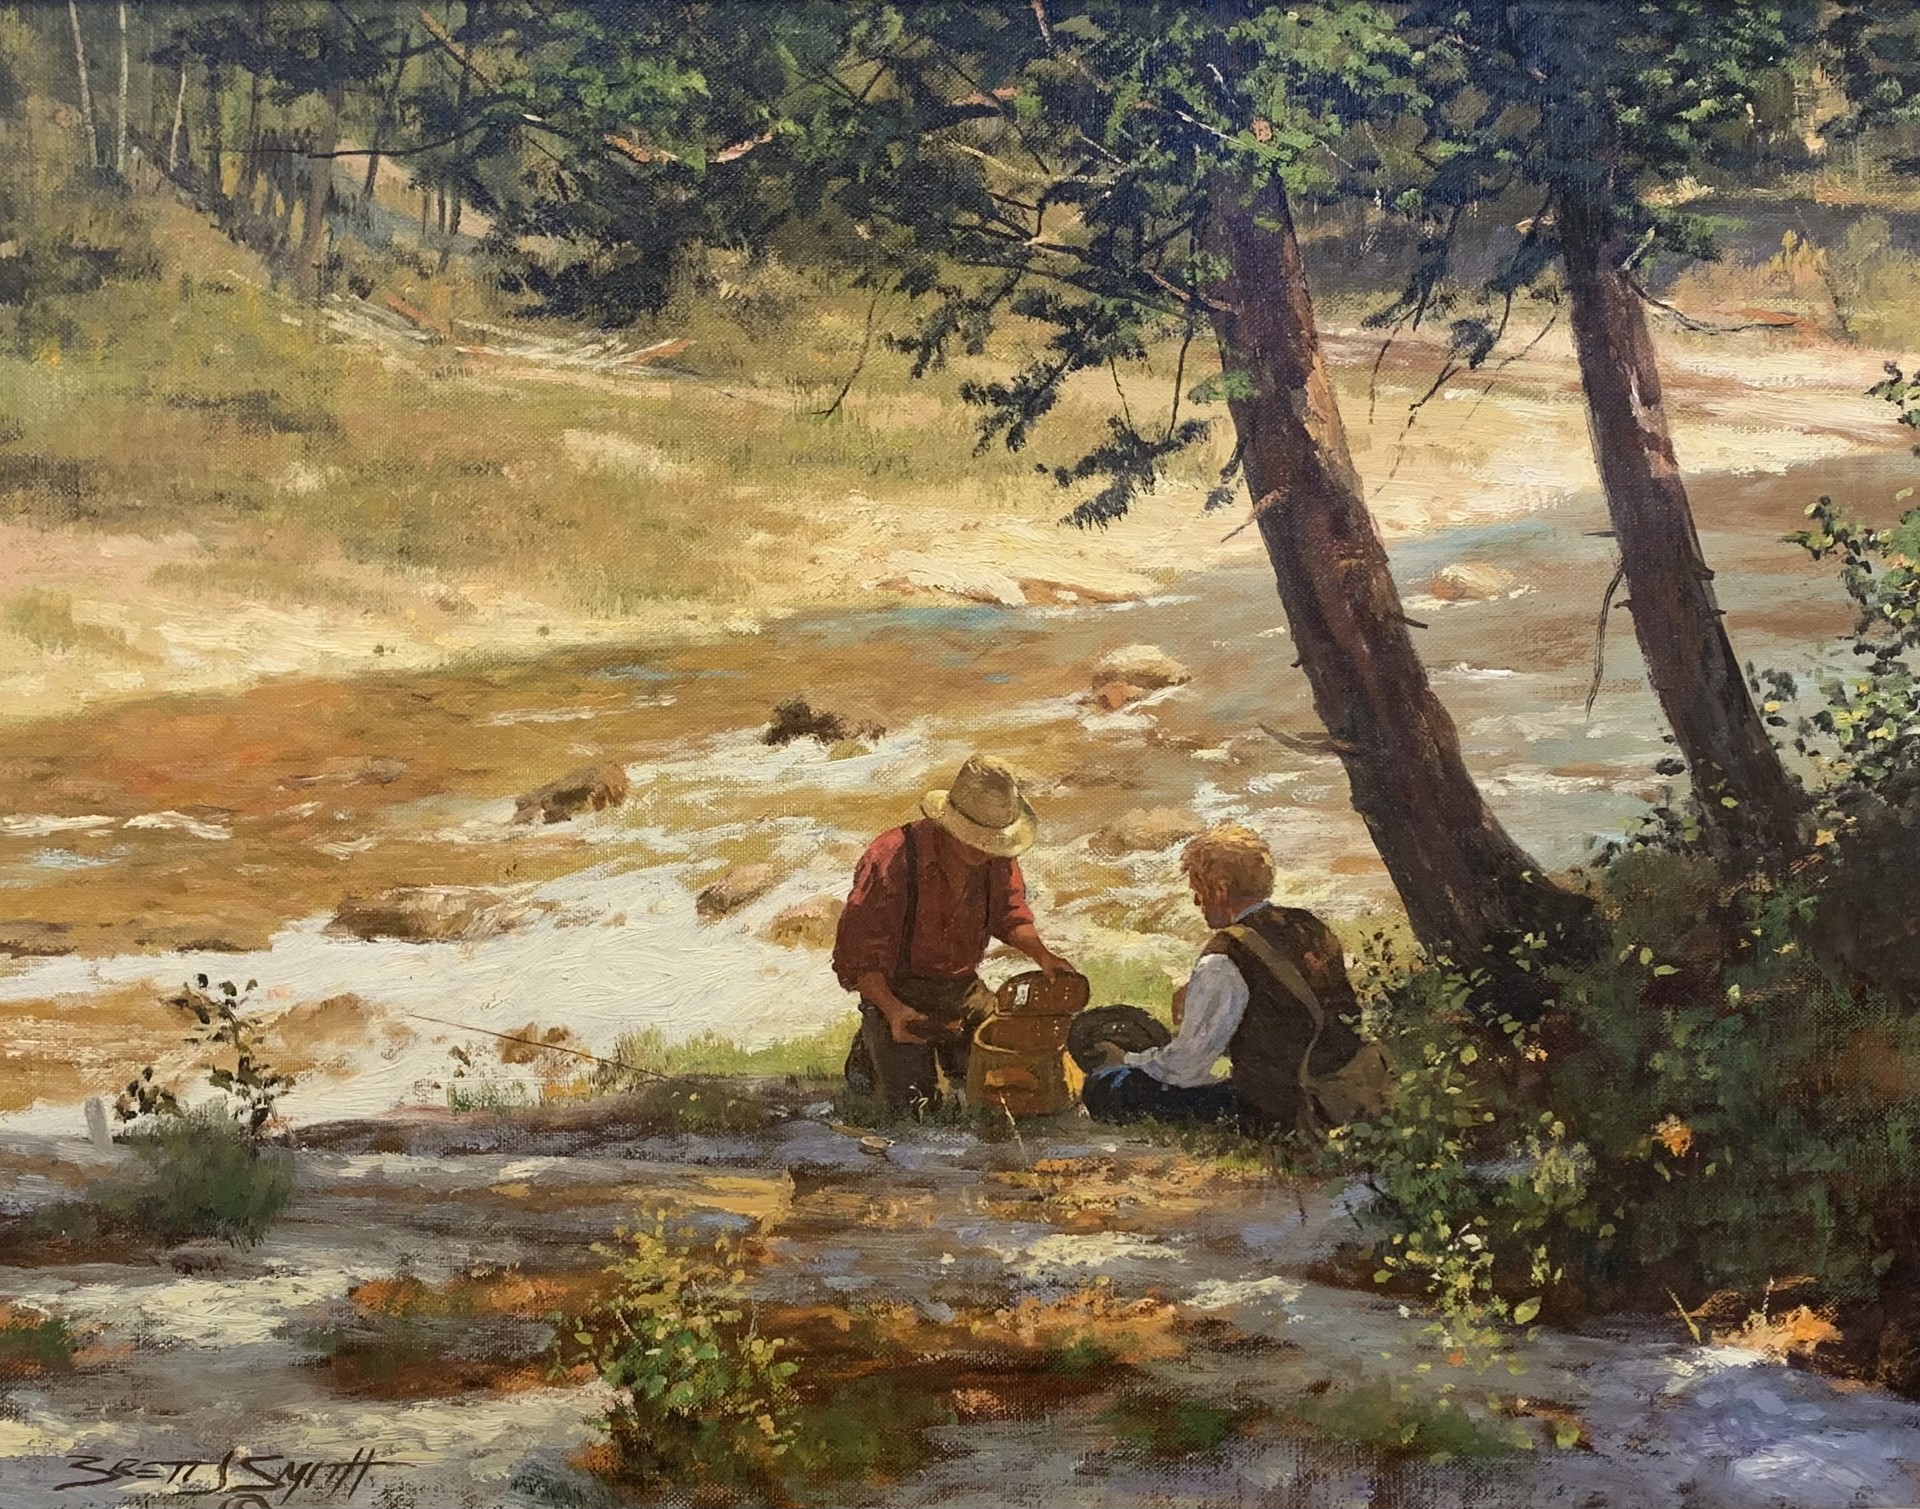 LUNCH IN THE SHADE by Brett J. Smith